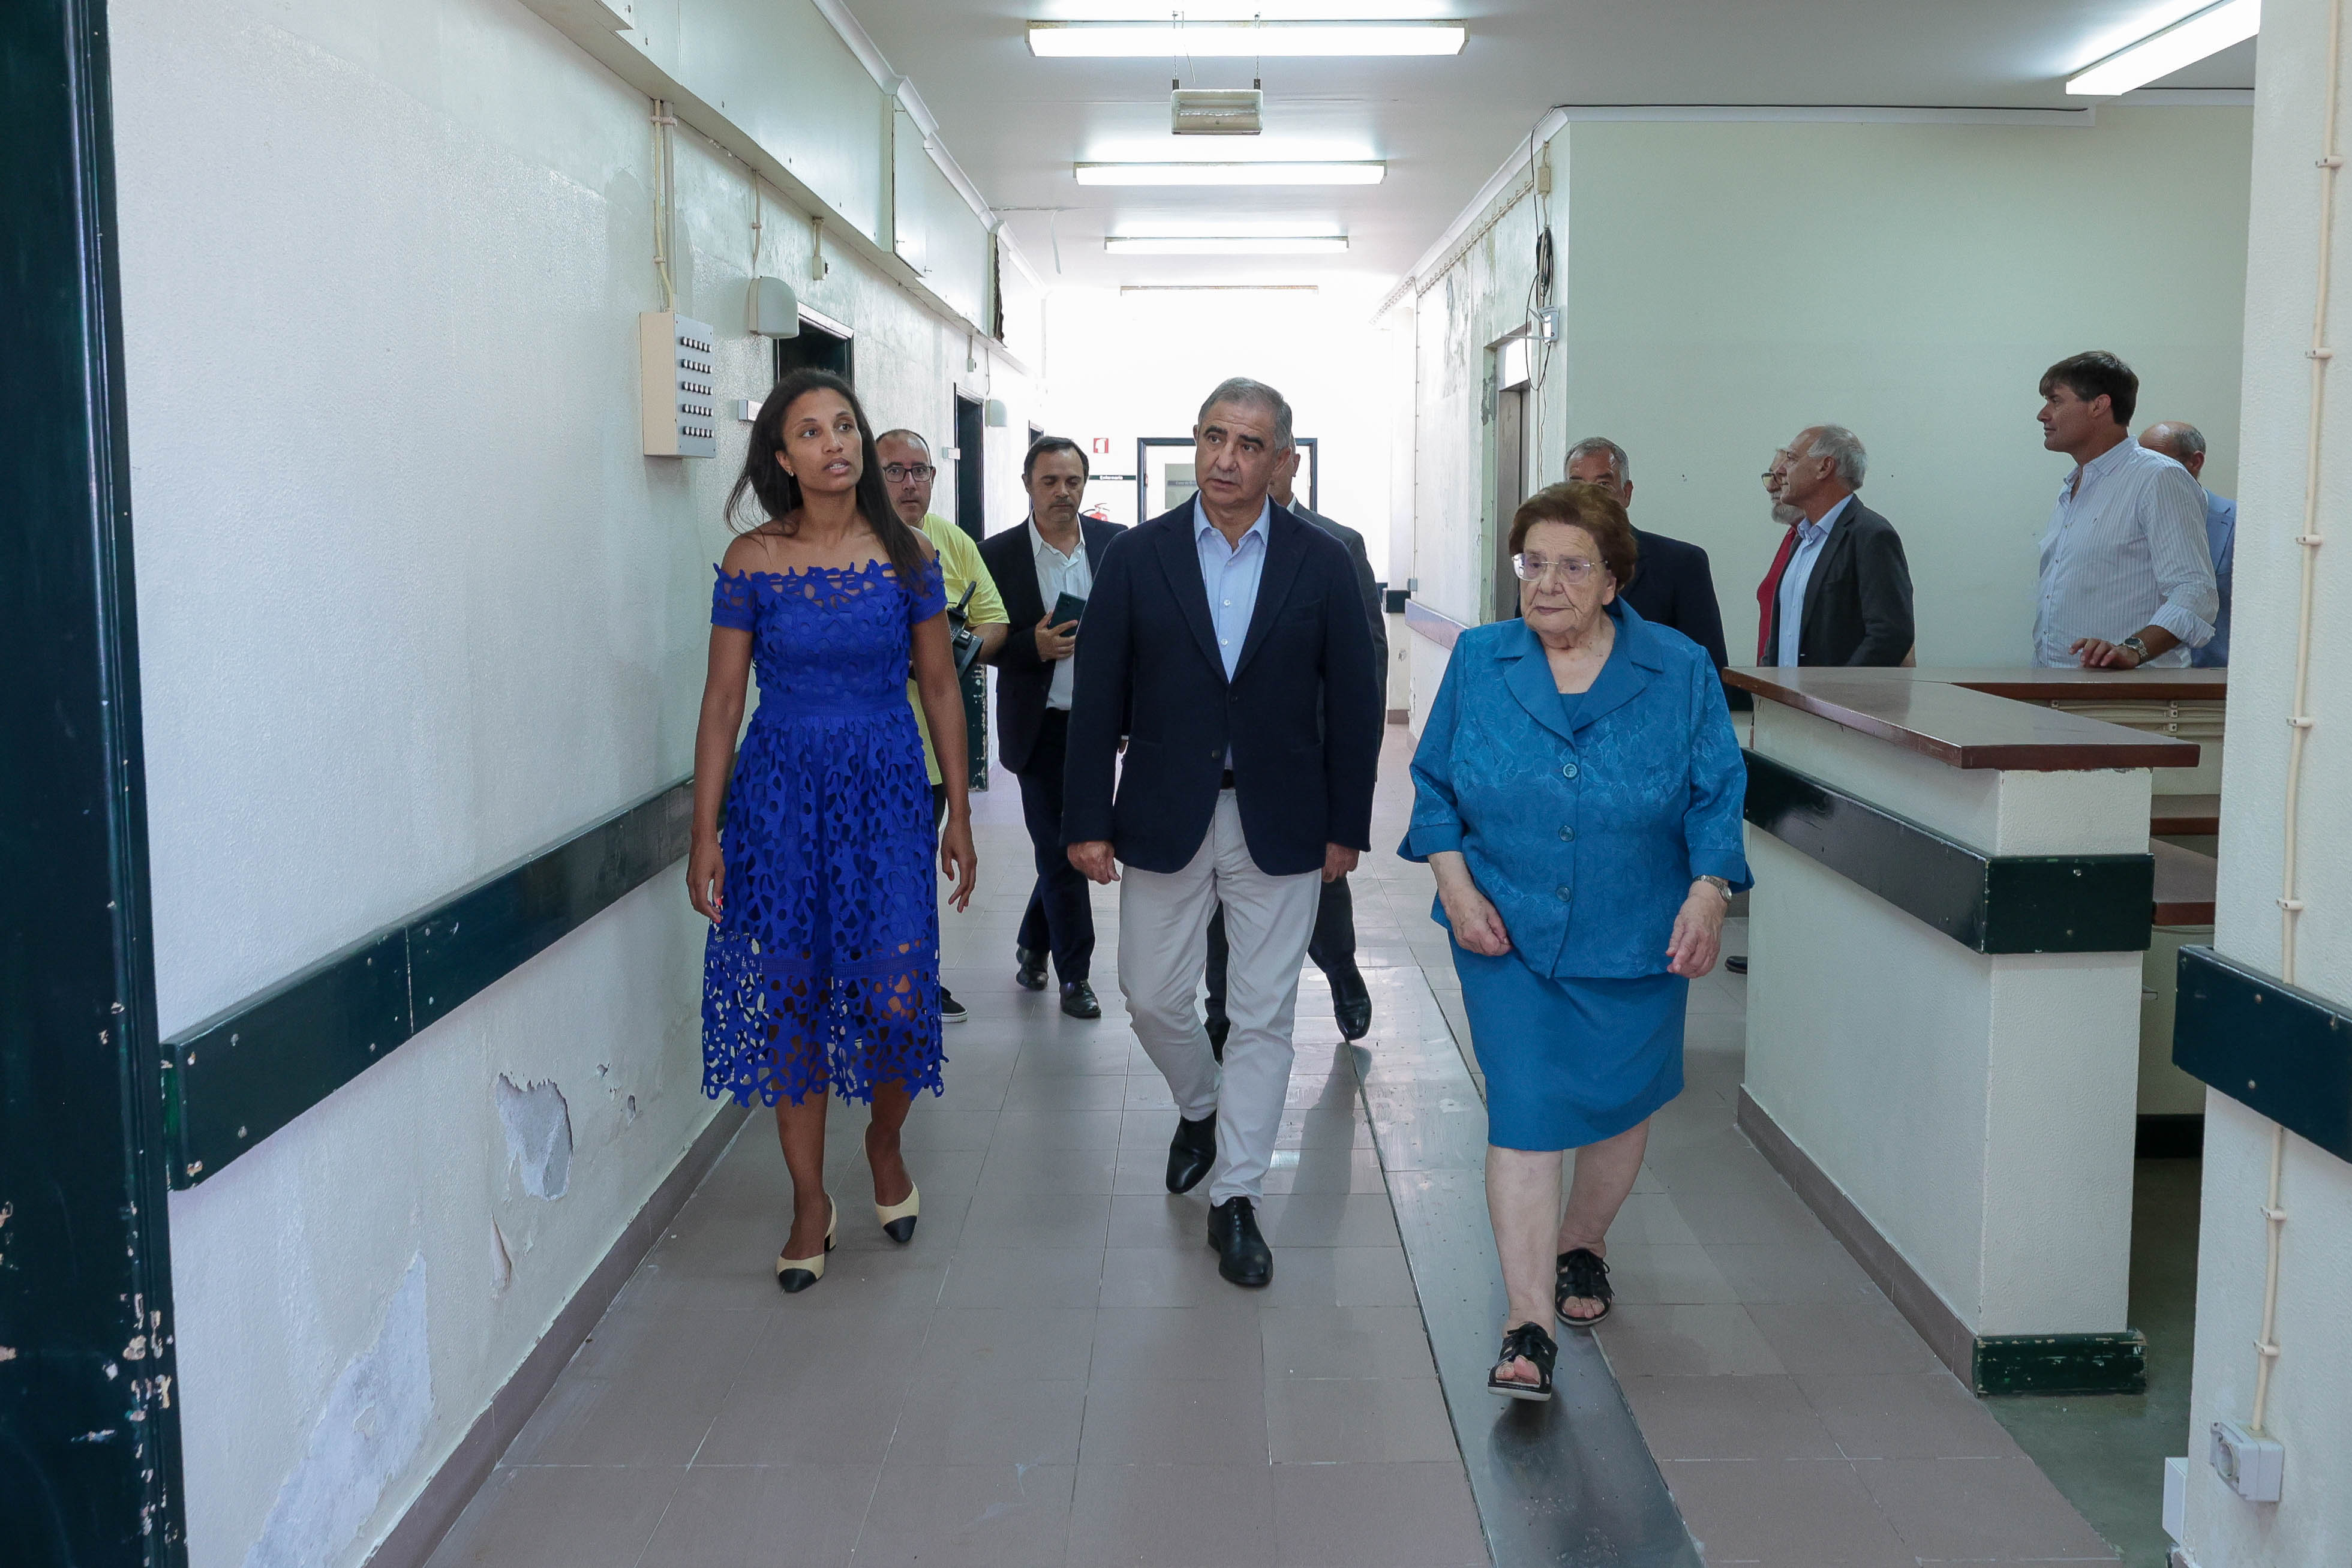 President of the Government welcomes conversion of former Graciosa health centre into nursing home